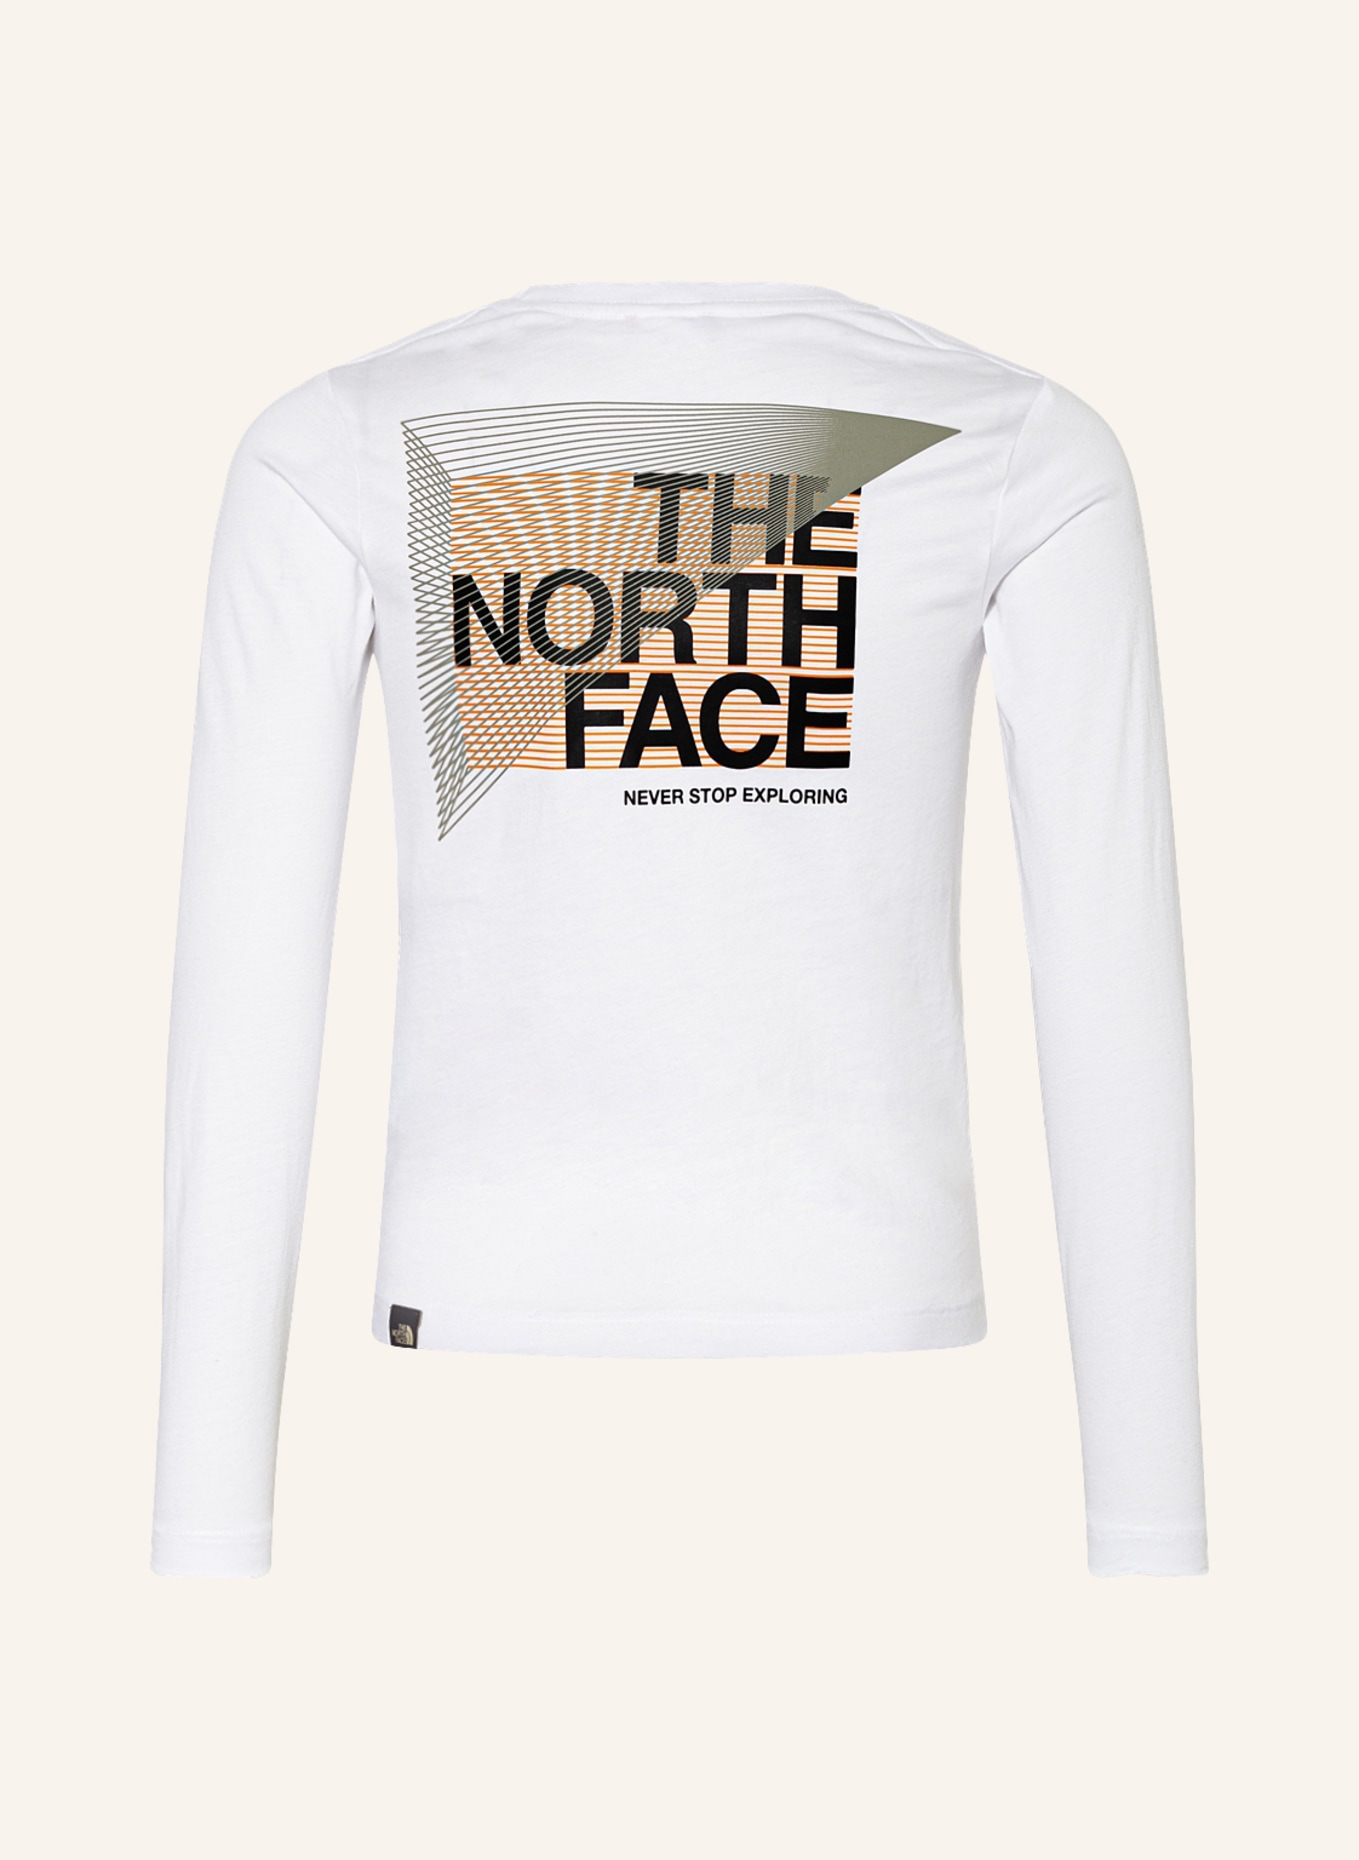 THE NORTH FACE Longsleeve , Farbe: WEISS (Bild 2)